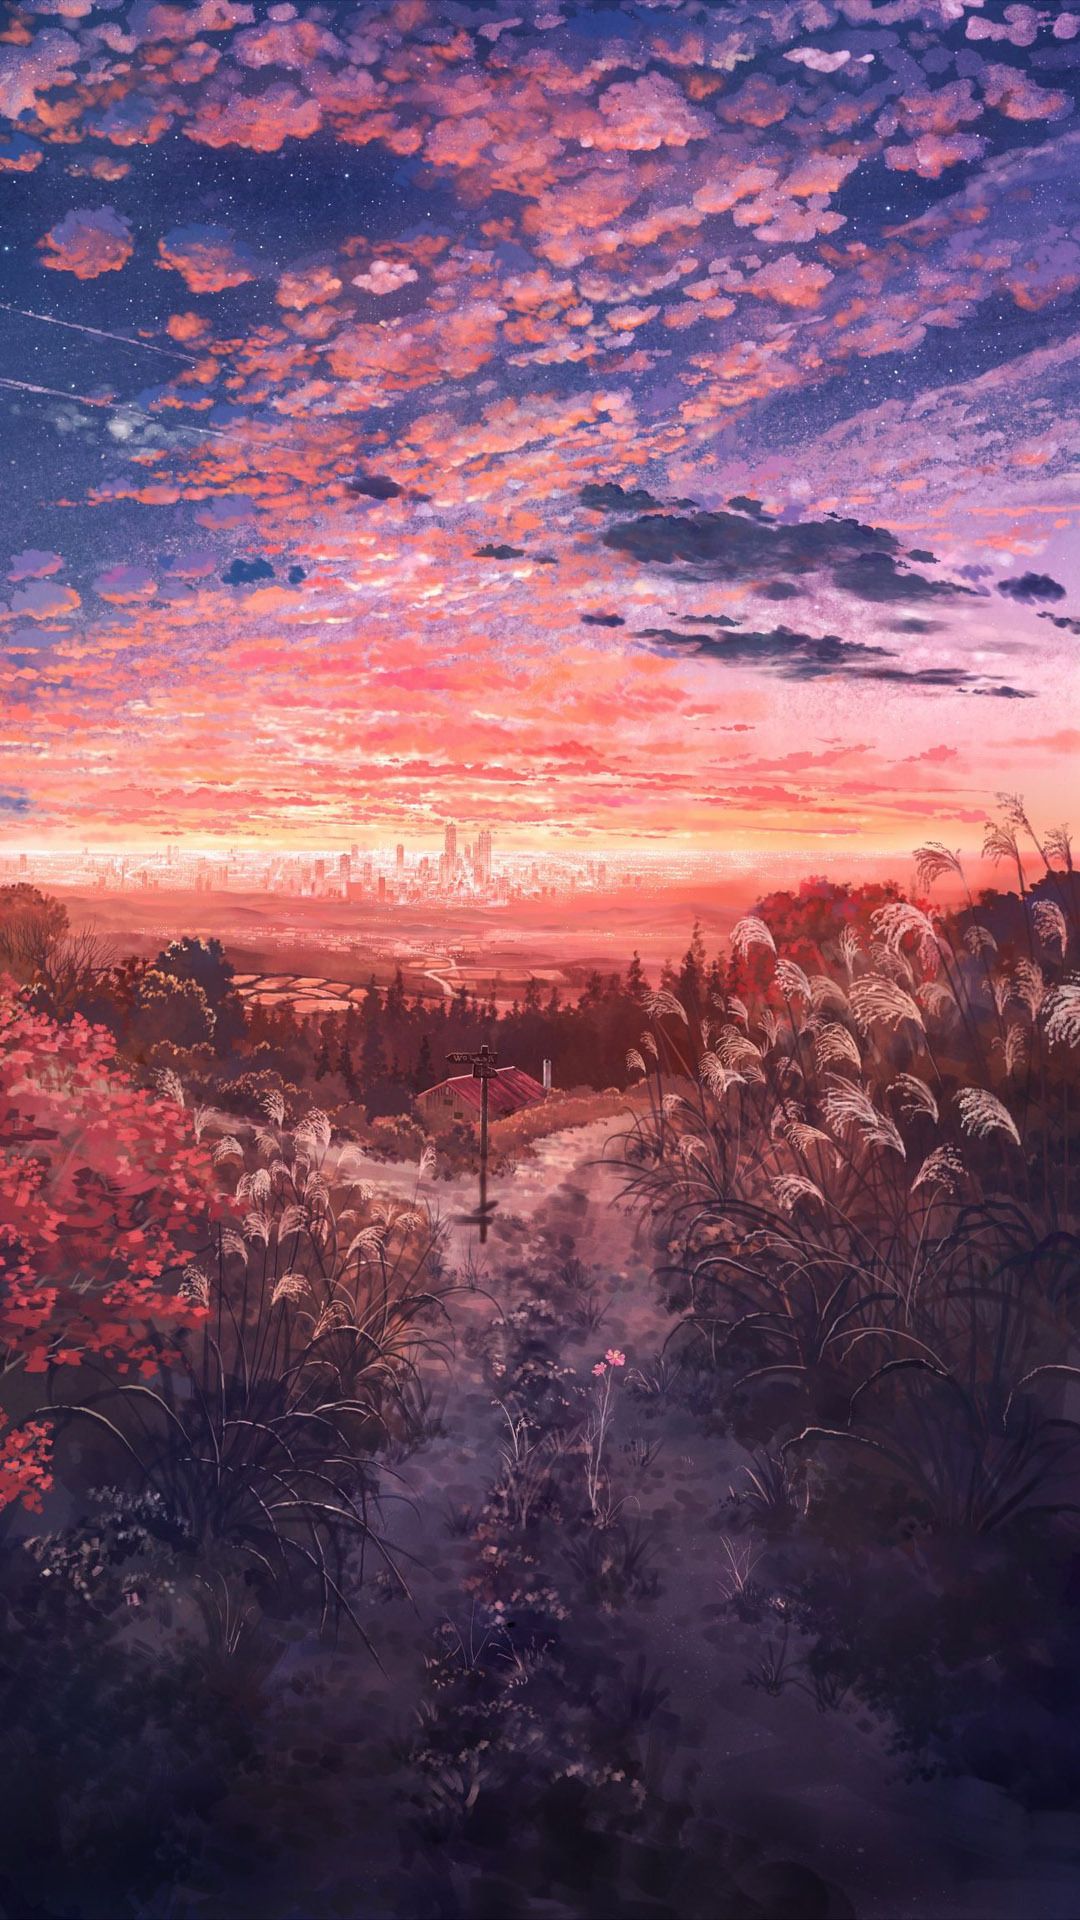 Anime Manga Landscape at Dusk 4K Moody Lofi Abstract Background Sad  Beautiful Artwork with Pink Clouds and Fields Stock Illustration   Illustration of style scenery 253207600